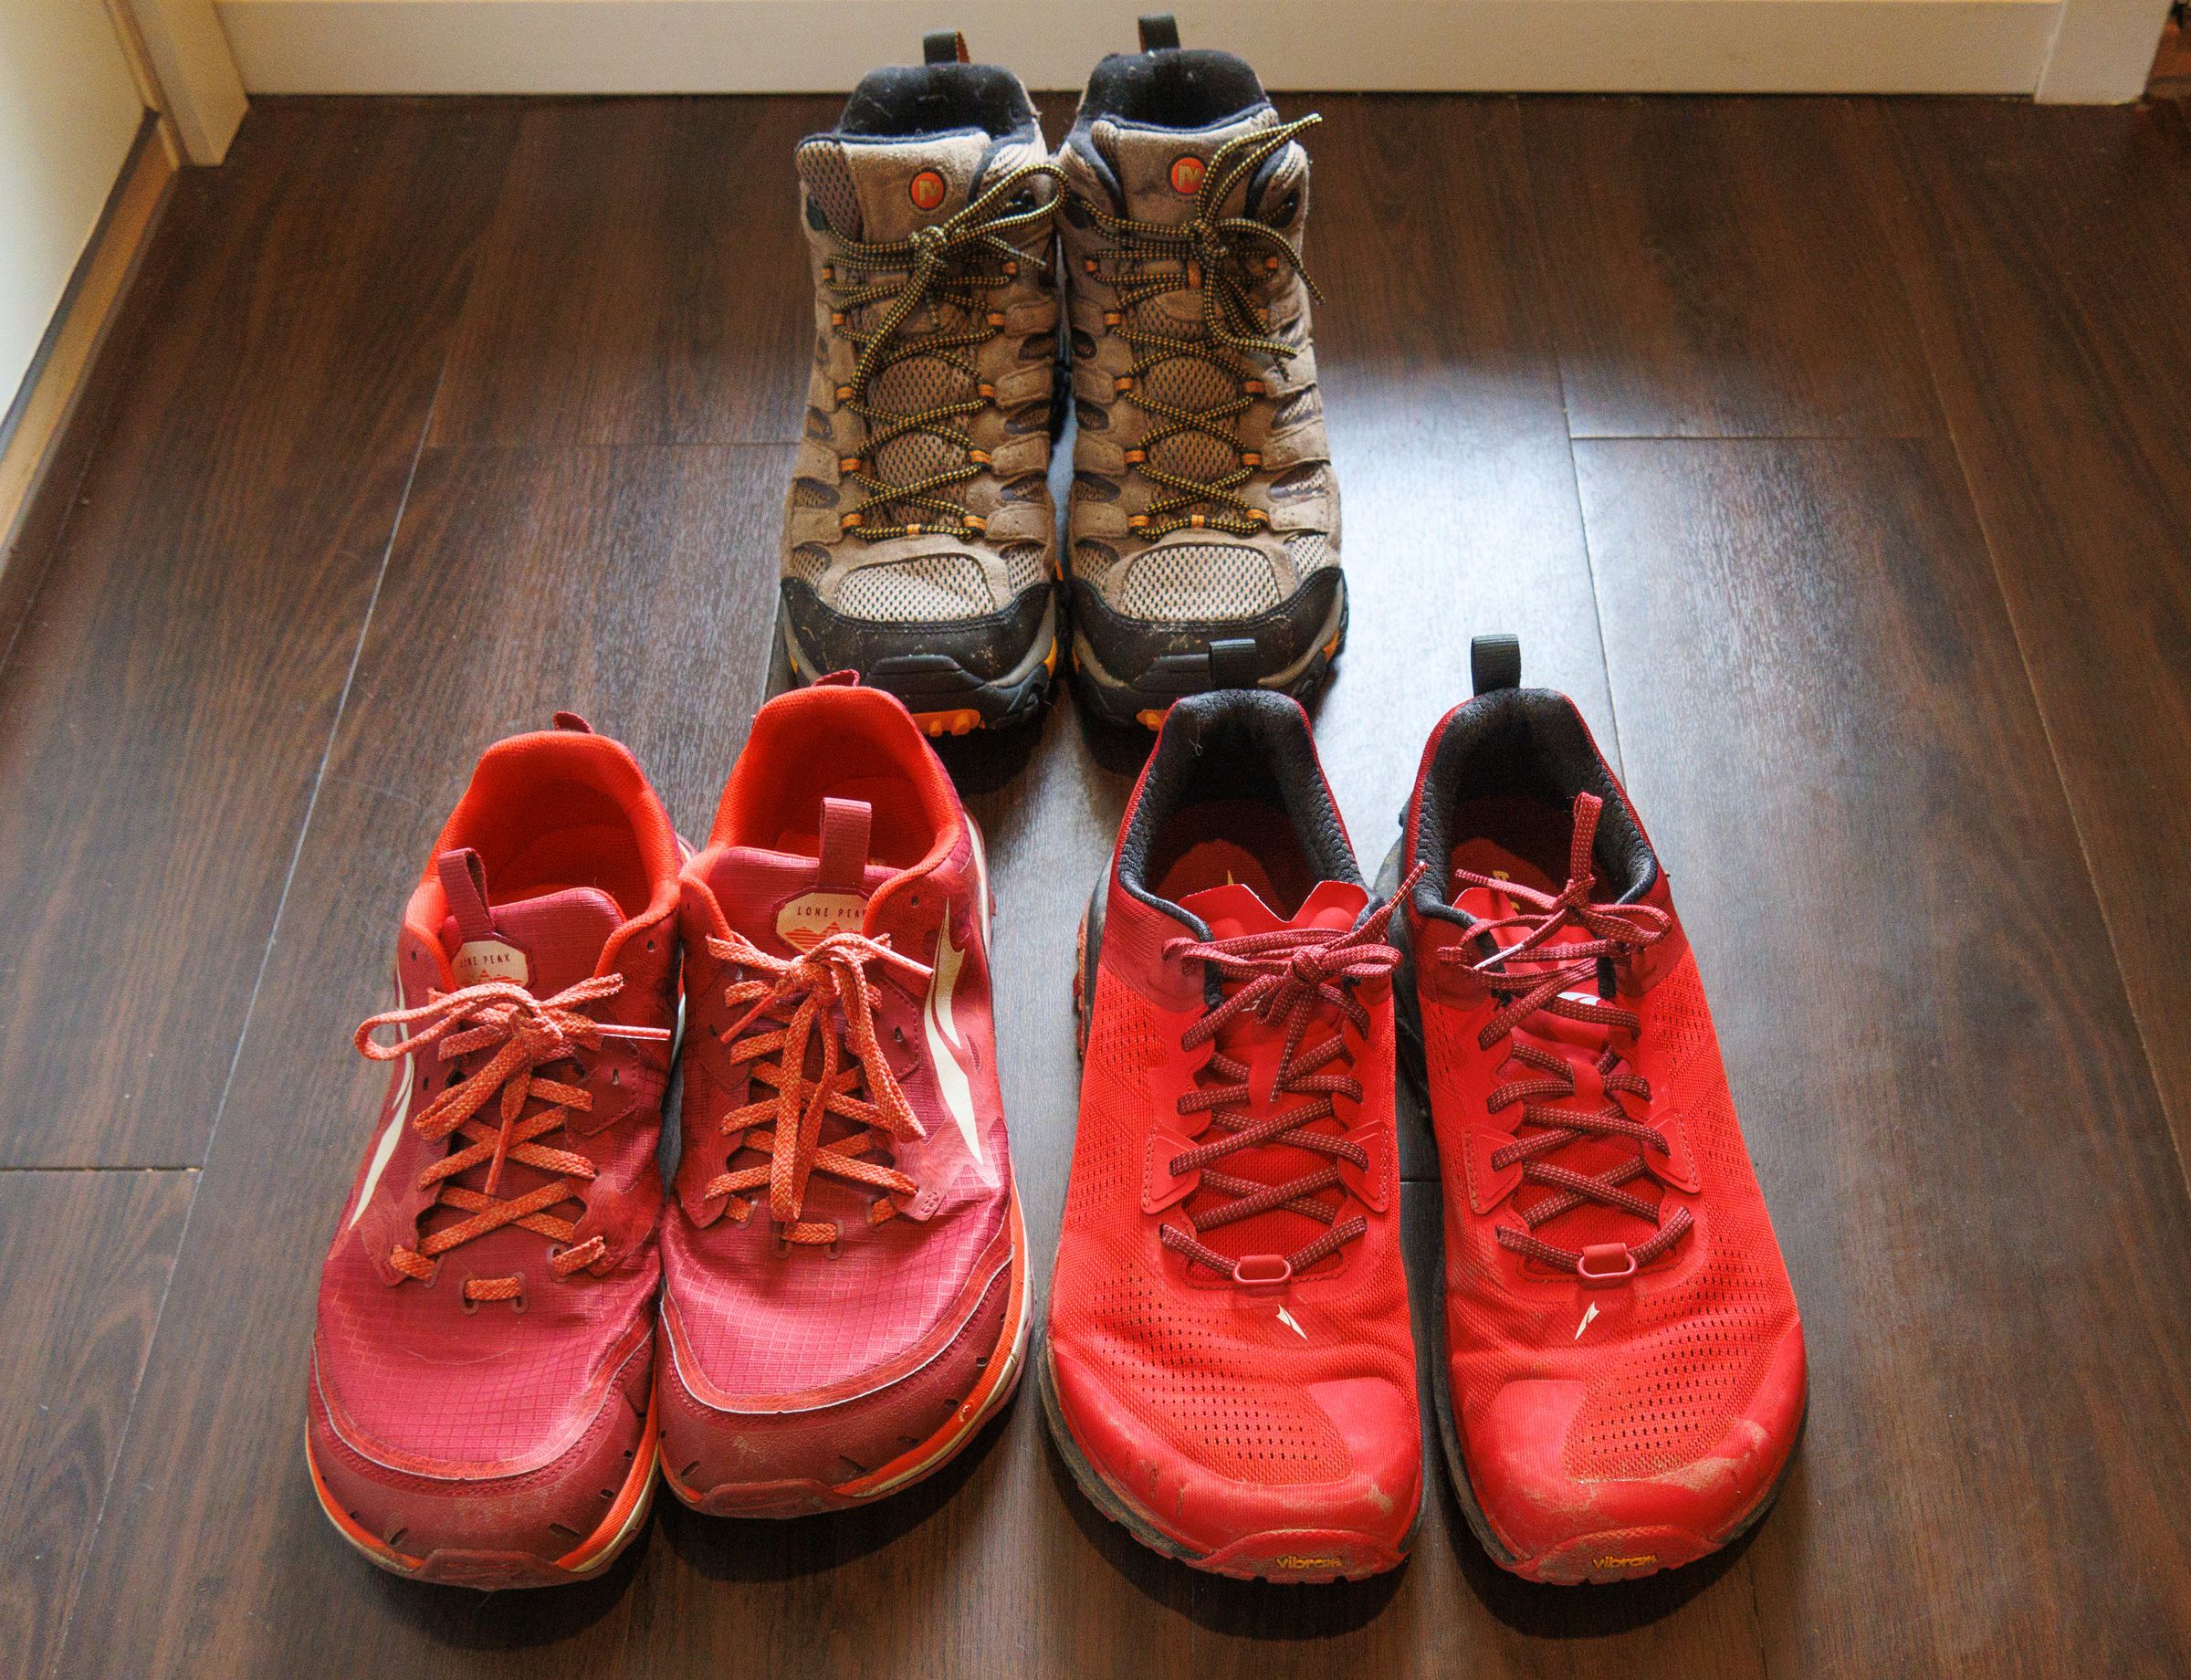 Photos of two pairs of running shoes in front of a pair of boots.